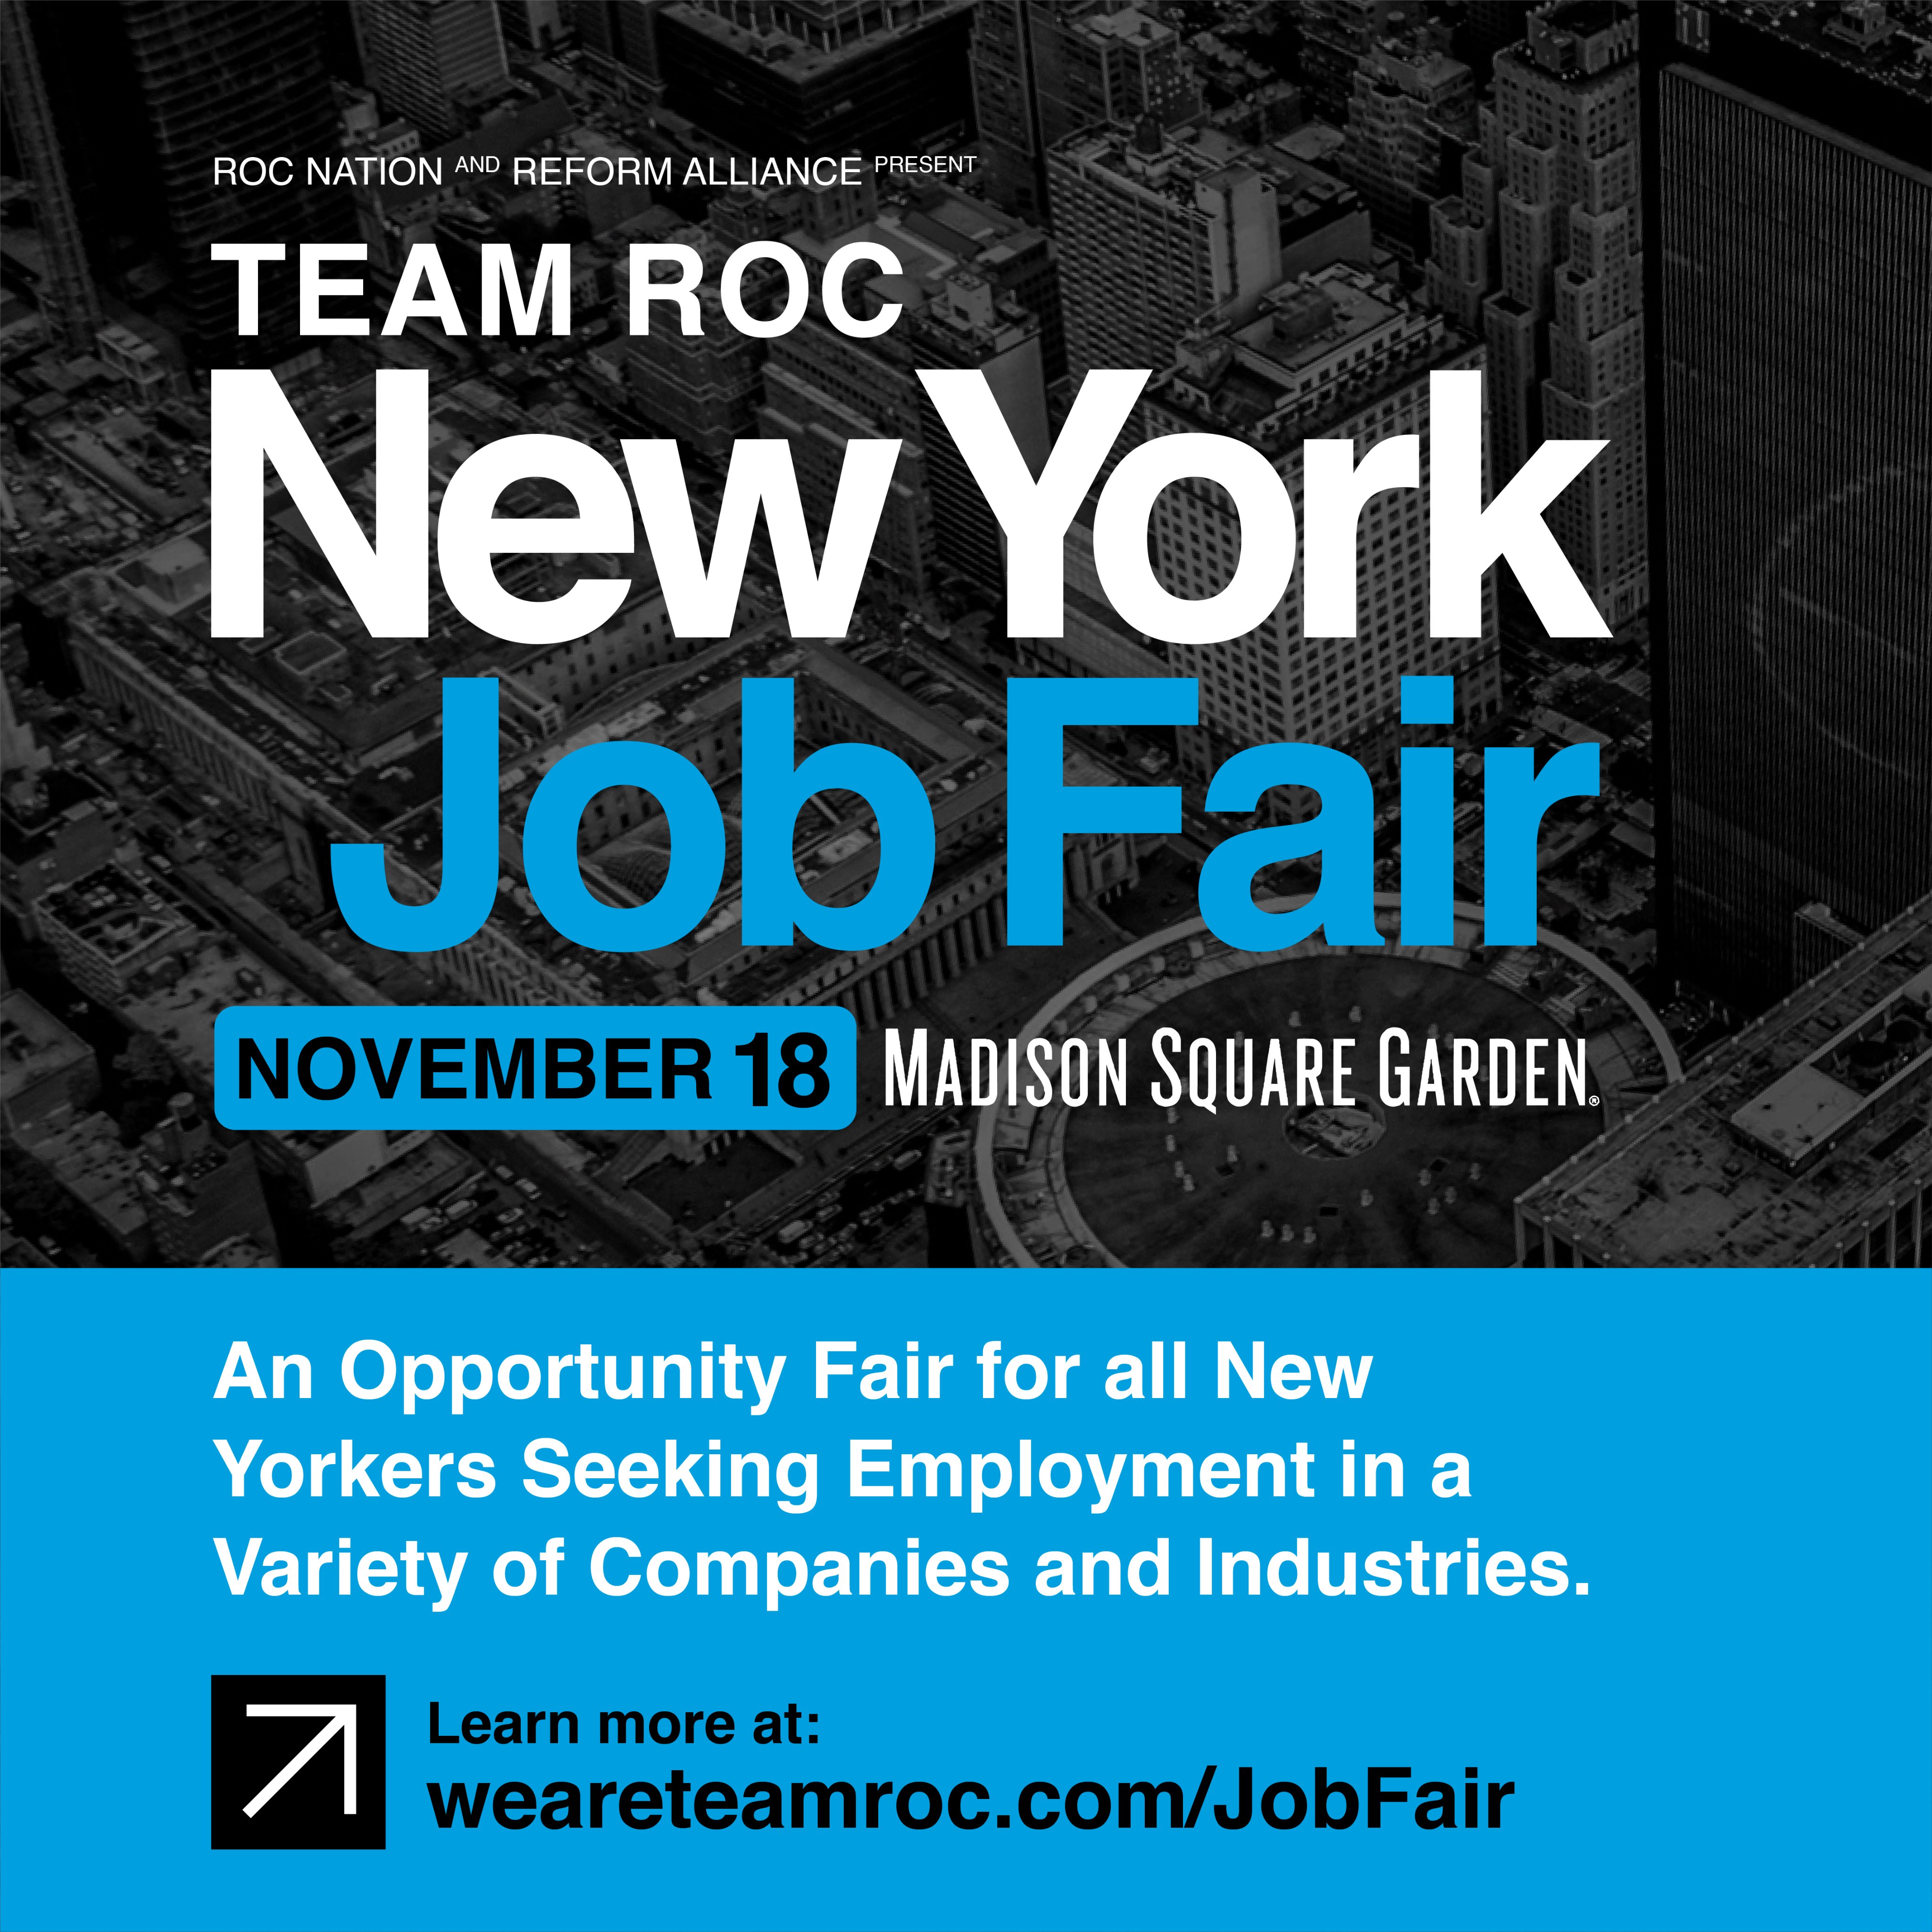 Jay-Z’s Roc Nation Teams Up With Reform Alliance to Hold Job Fair at Madison Square Garden on November 18